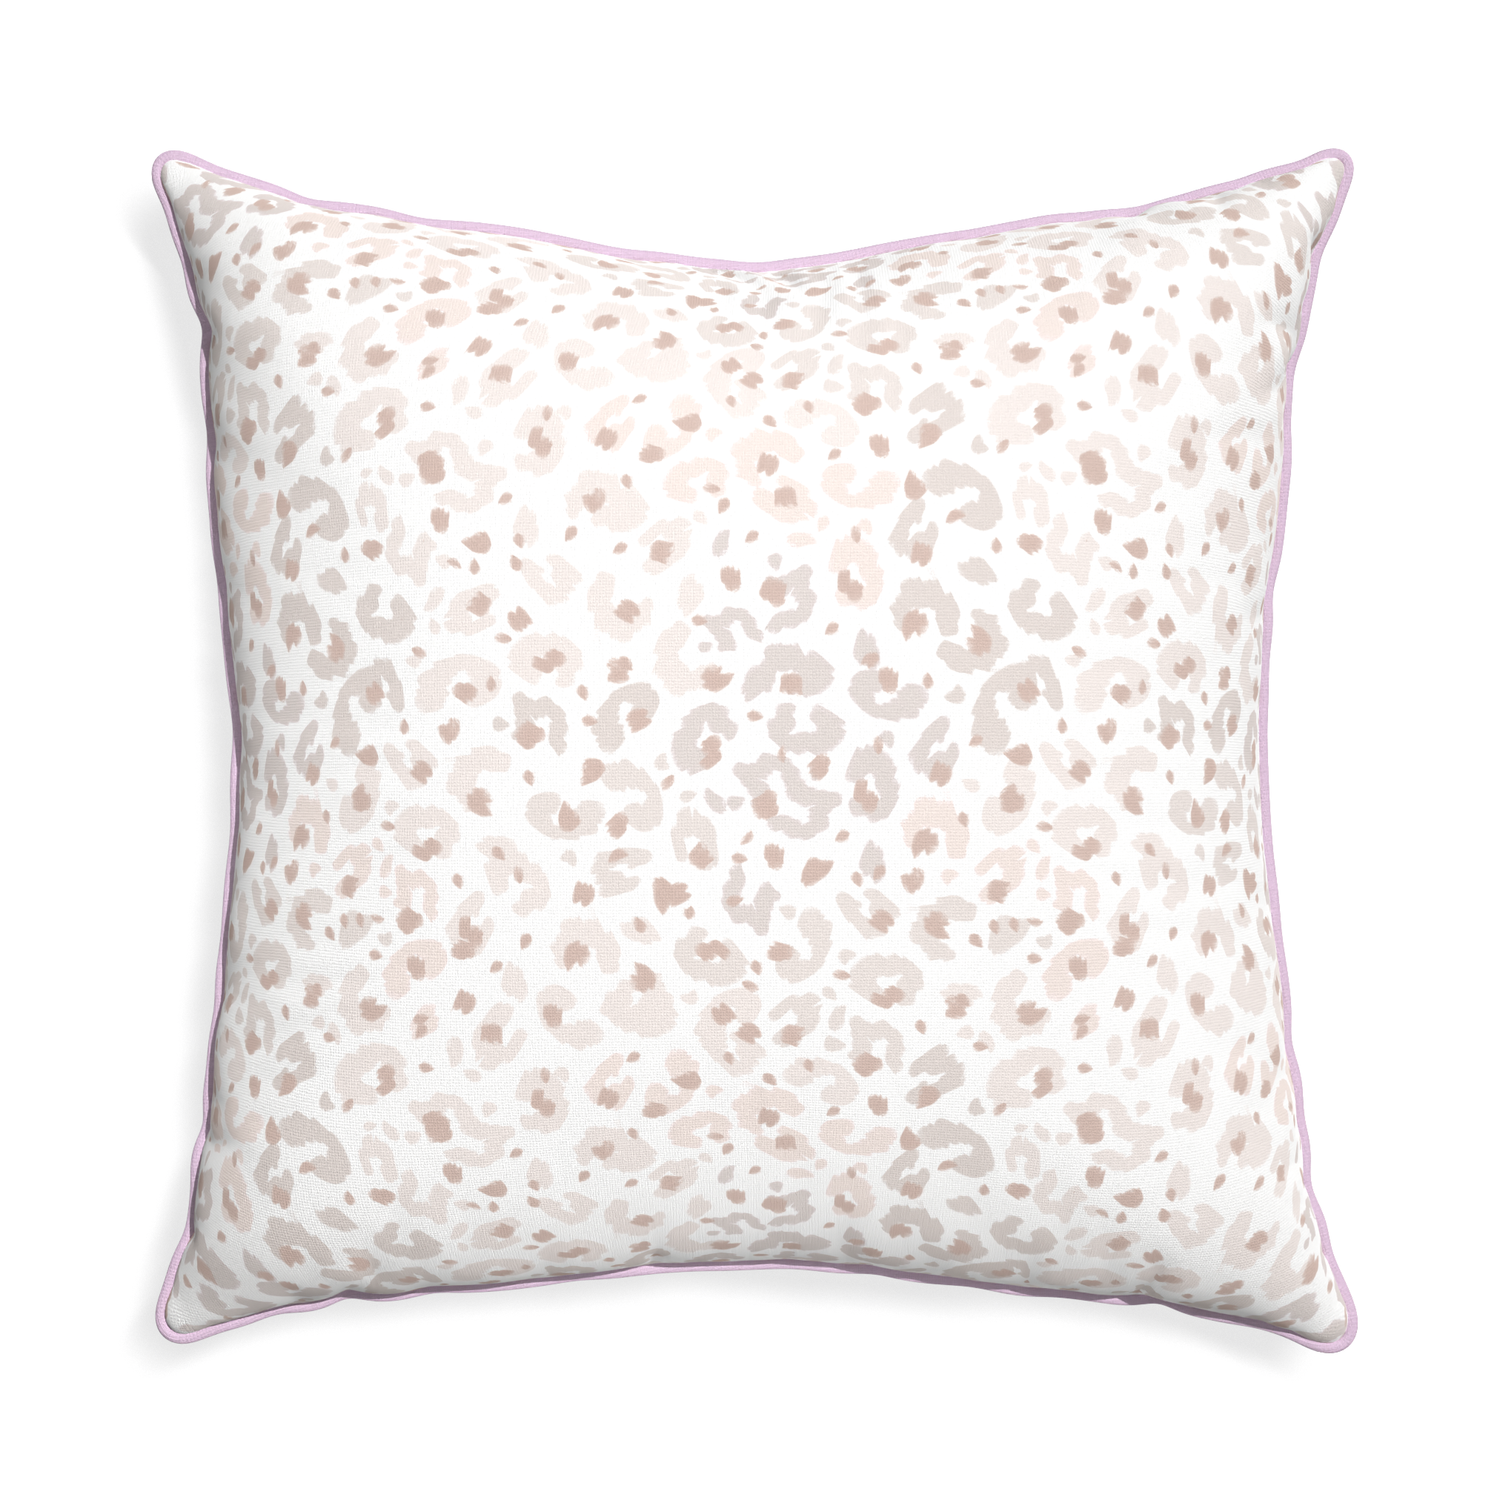 Euro-sham rosie custom beige animal printpillow with l piping on white background